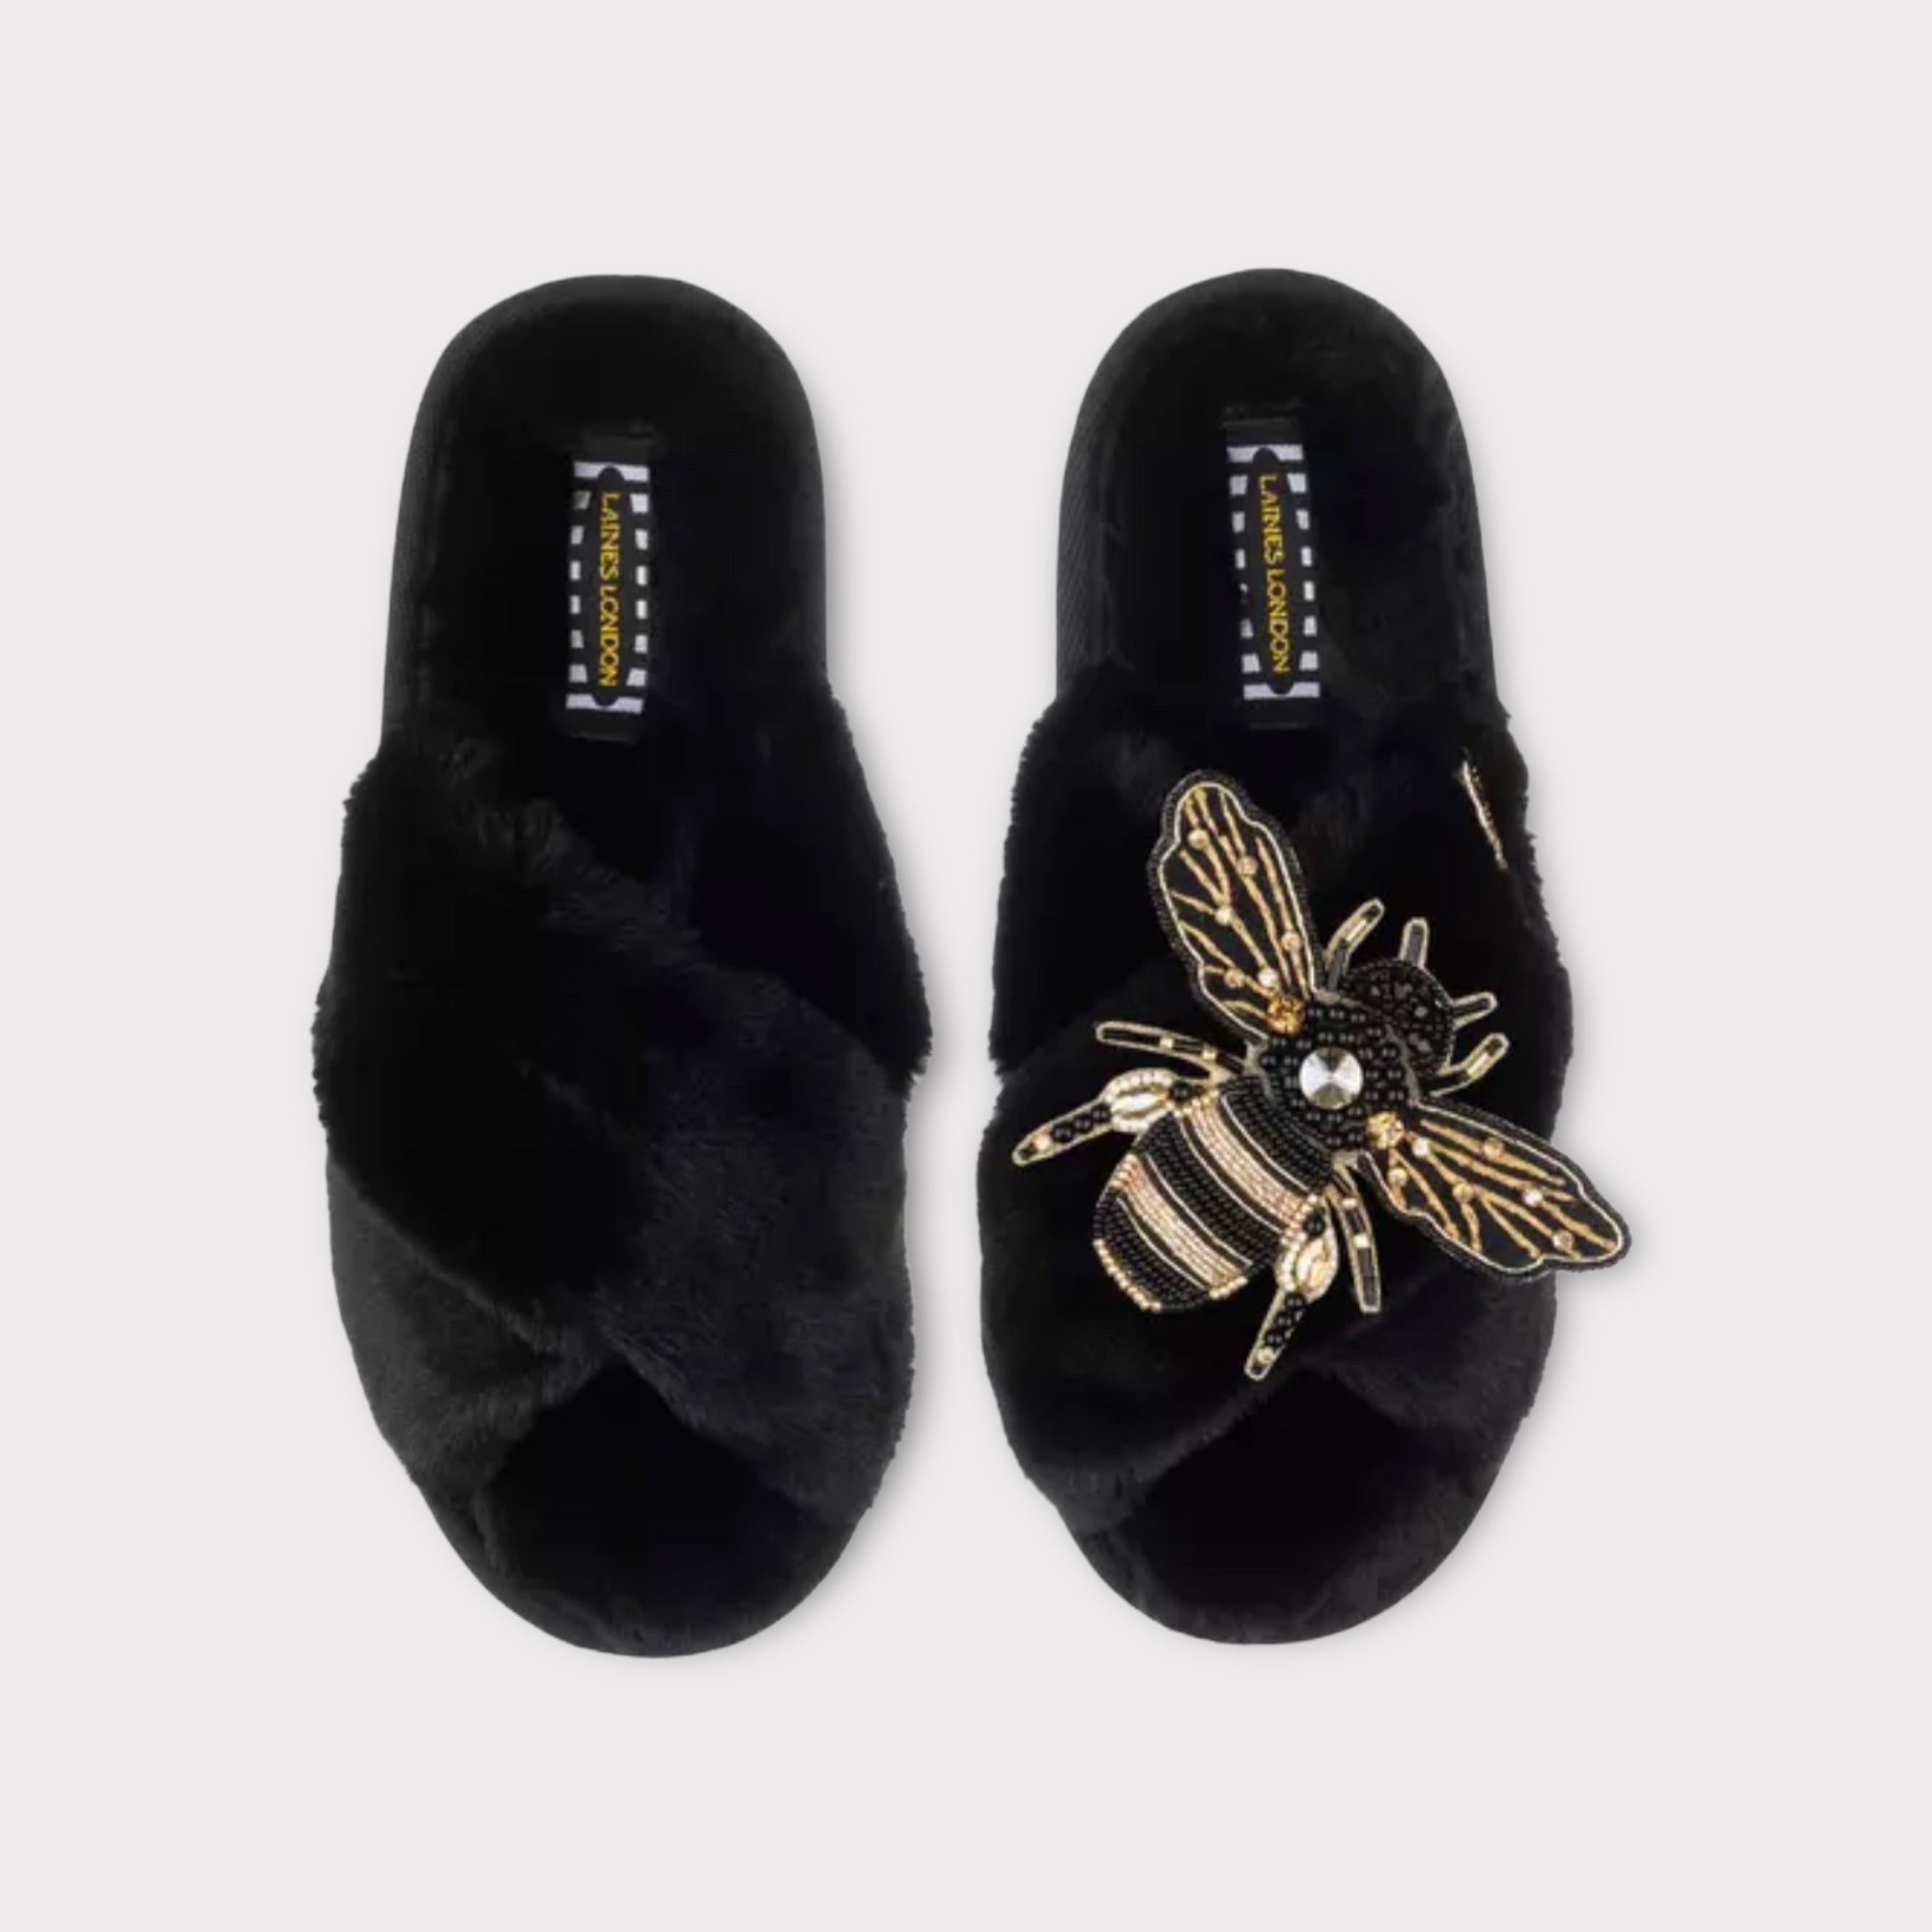 Laines London Classic Black Slippers with Artisan Gold Honey Bee